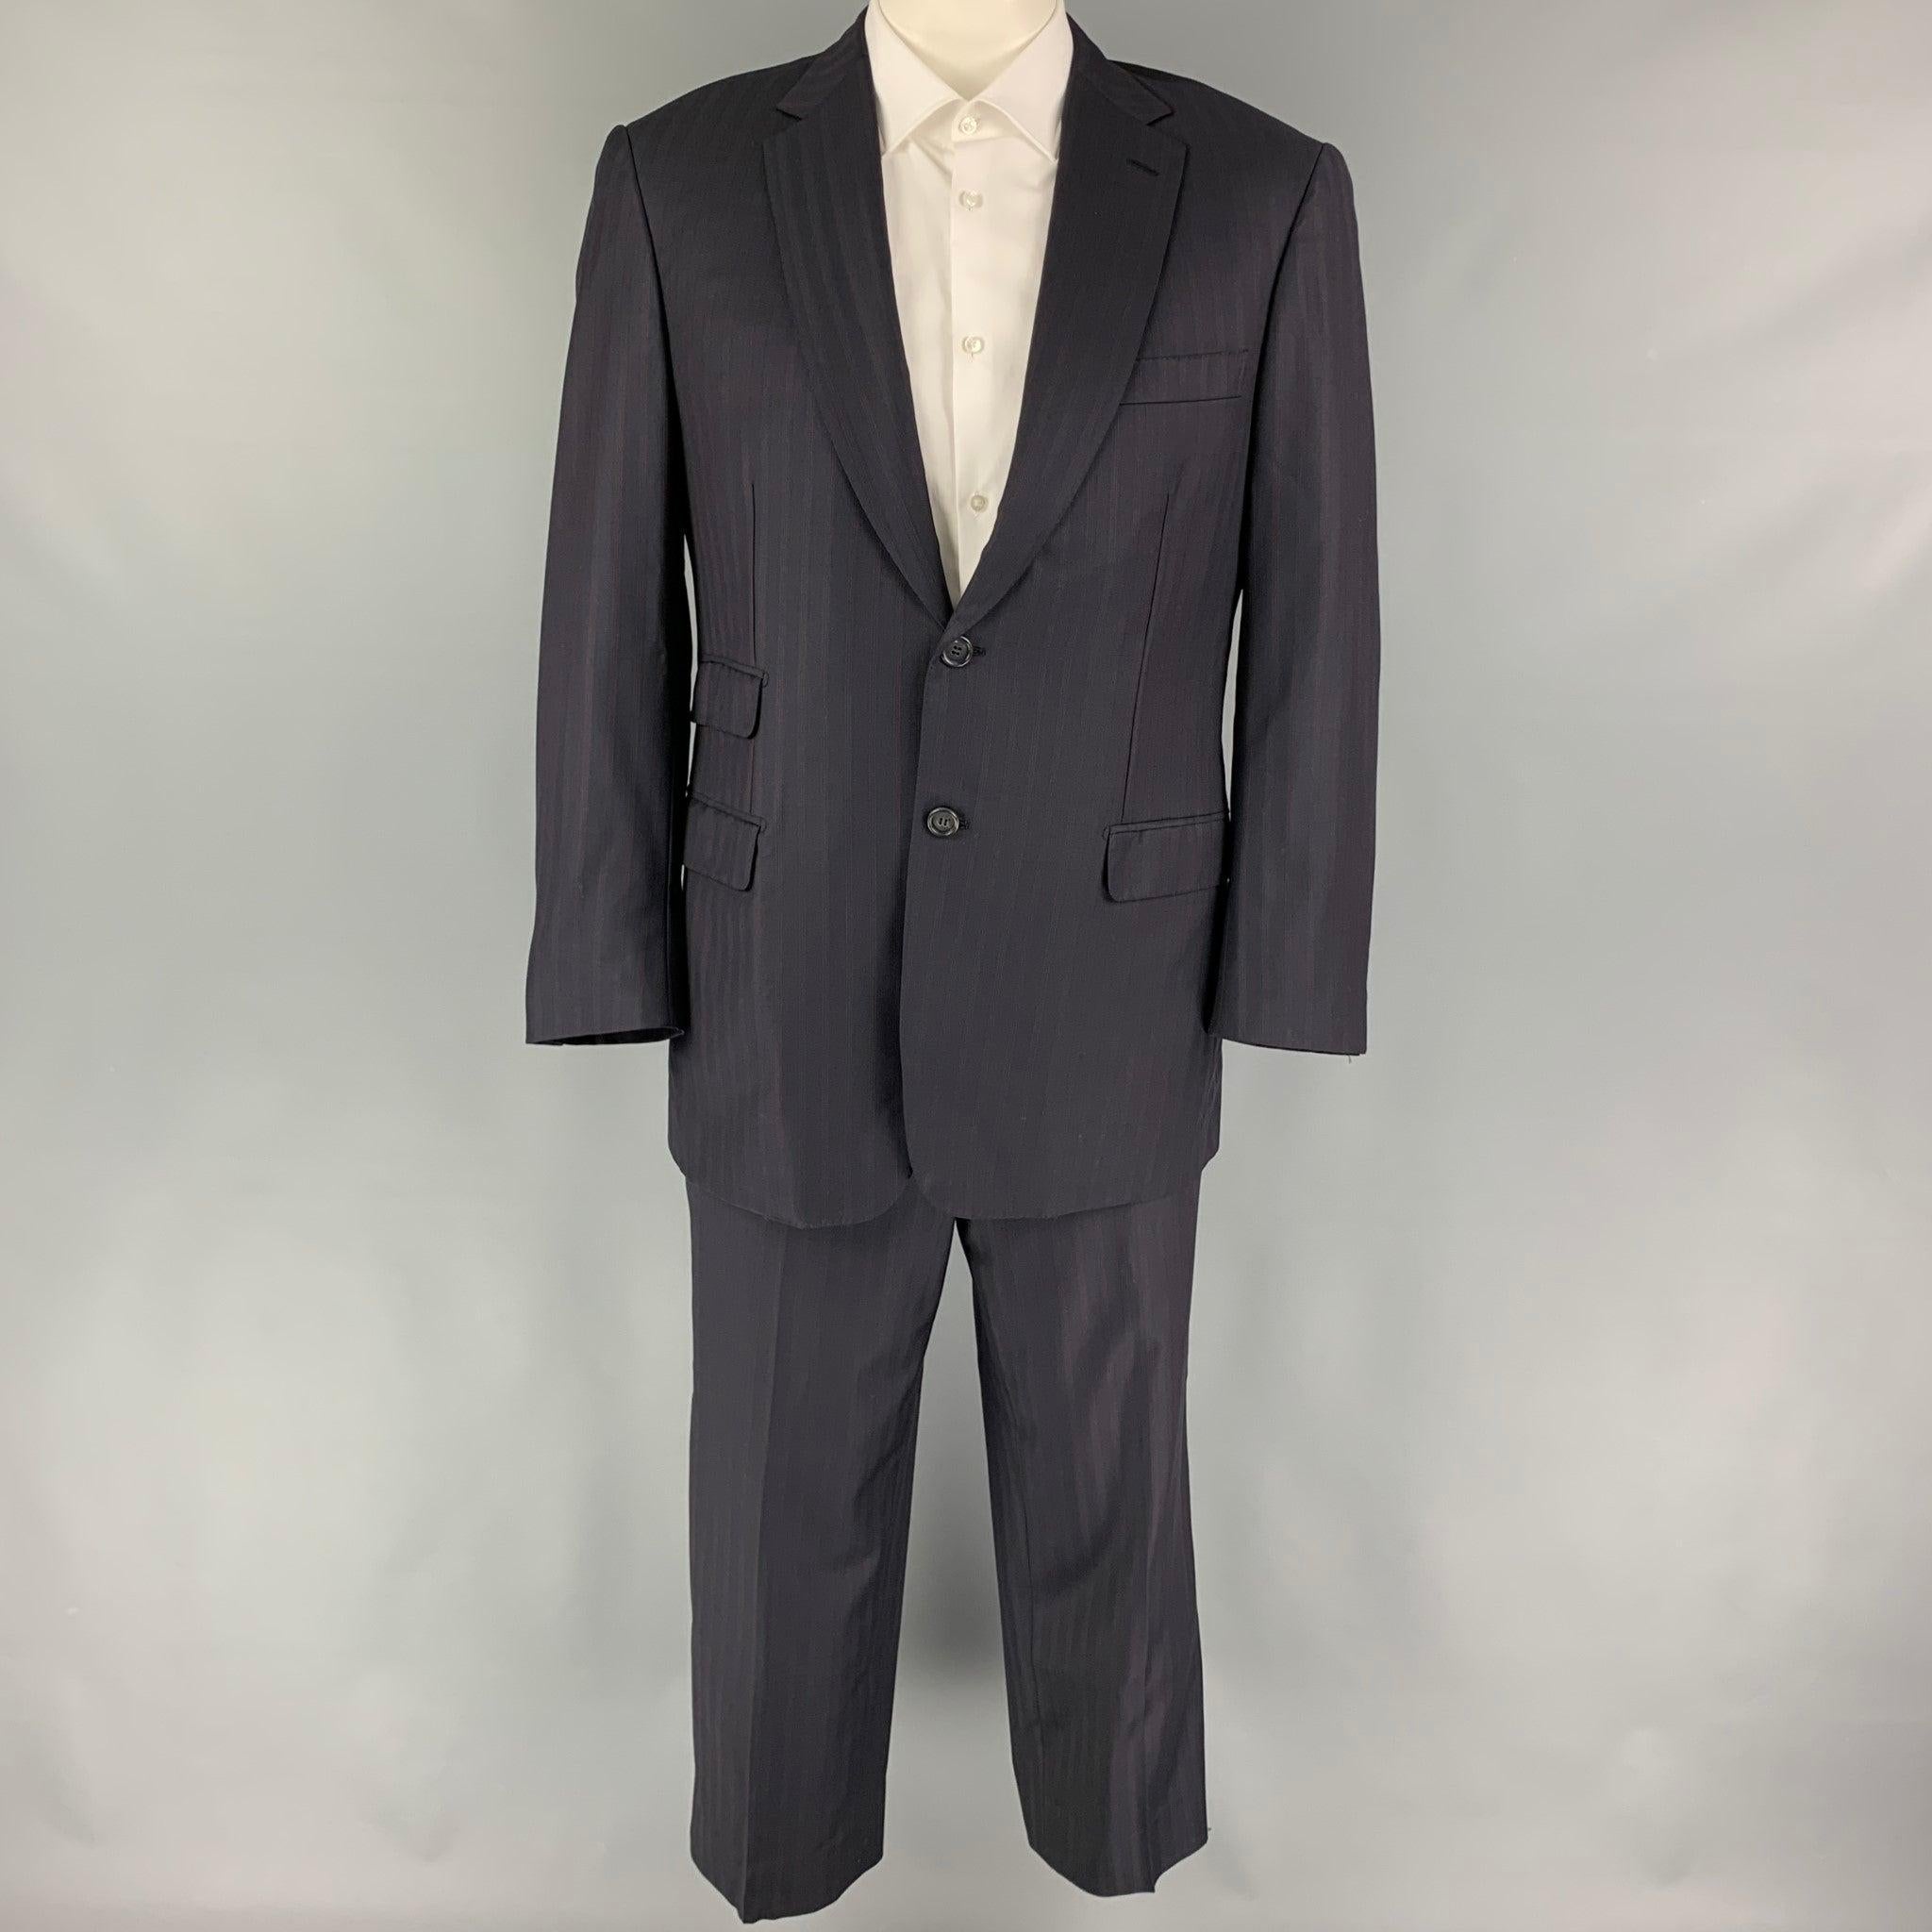 BRIONI
suit comes in a navy stripe wool with a full liner and includes a single breasted, double button sport coat with a notch lapel and matching flat front trousers. Made in Italy. Excellent Pre-Owned Condition. 

Marked:   42 R  

Measurements: 
